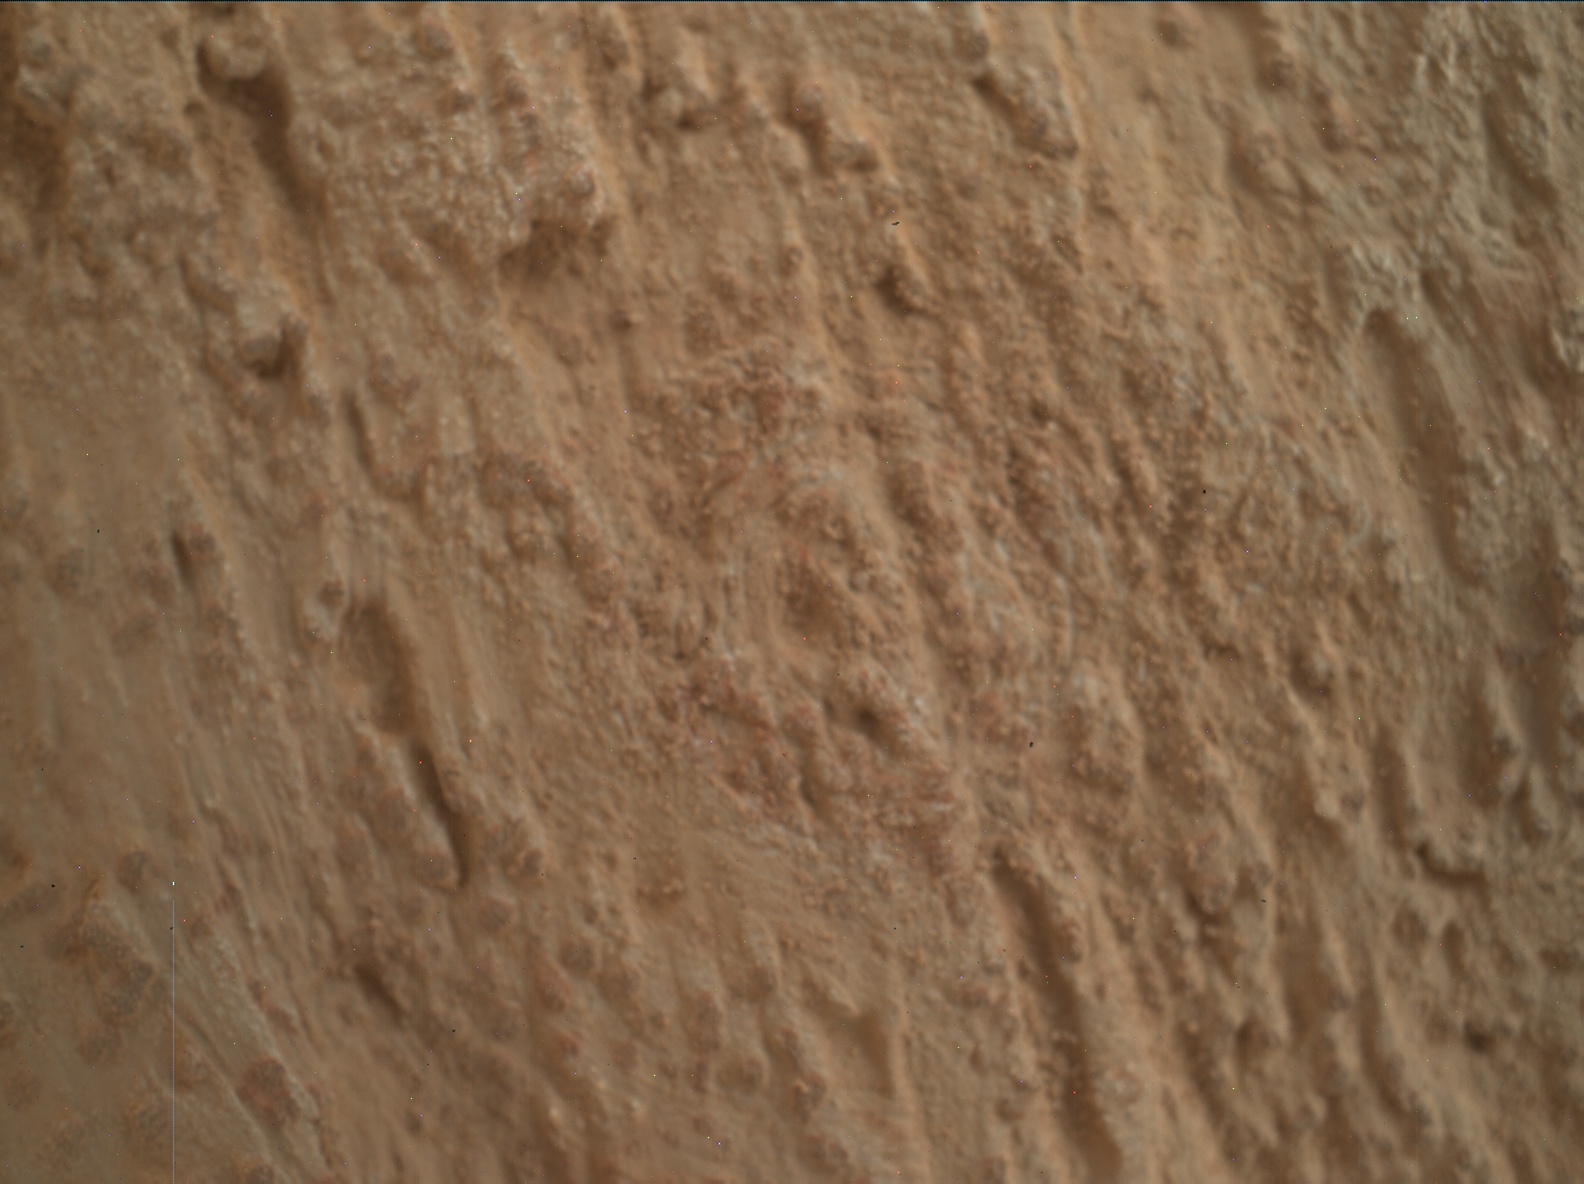 Nasa's Mars rover Curiosity acquired this image using its Mars Hand Lens Imager (MAHLI) on Sol 3321